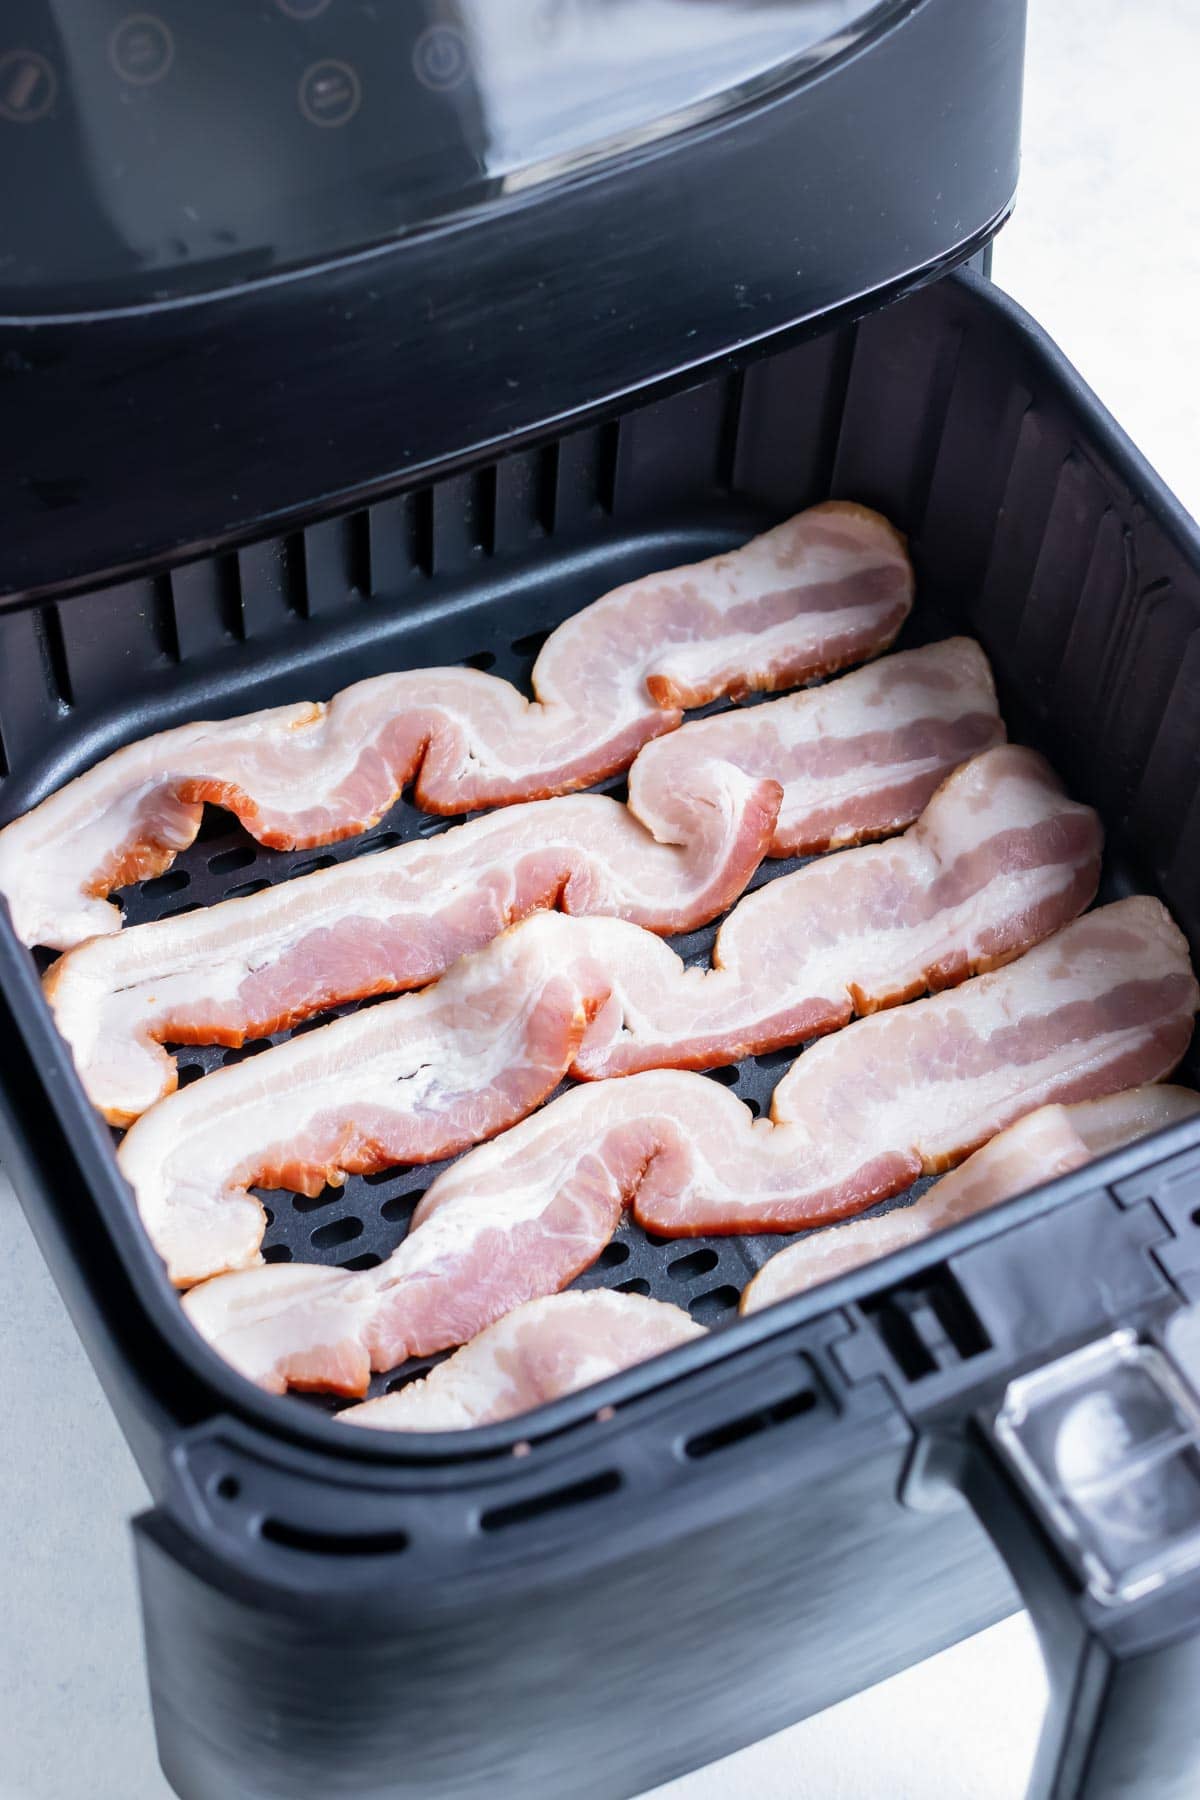 Slices of bacon are shown in the air fryer before cooking.